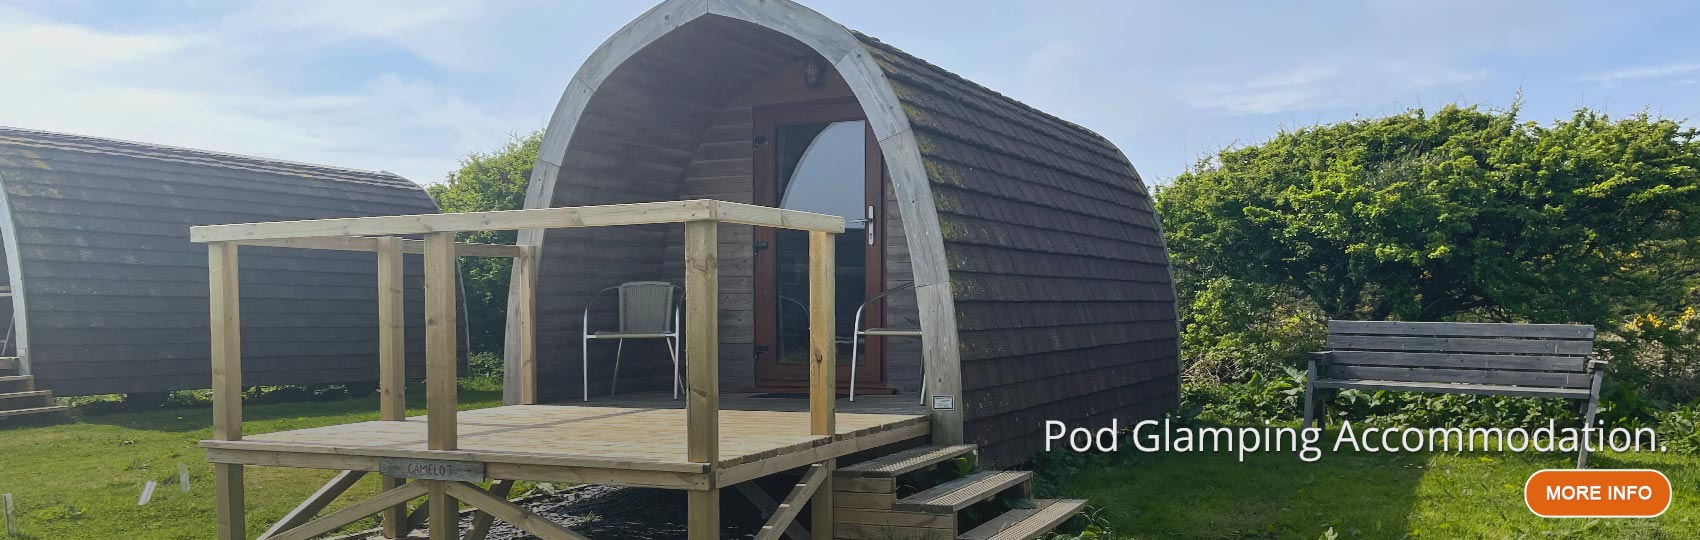 Two Glamping pods